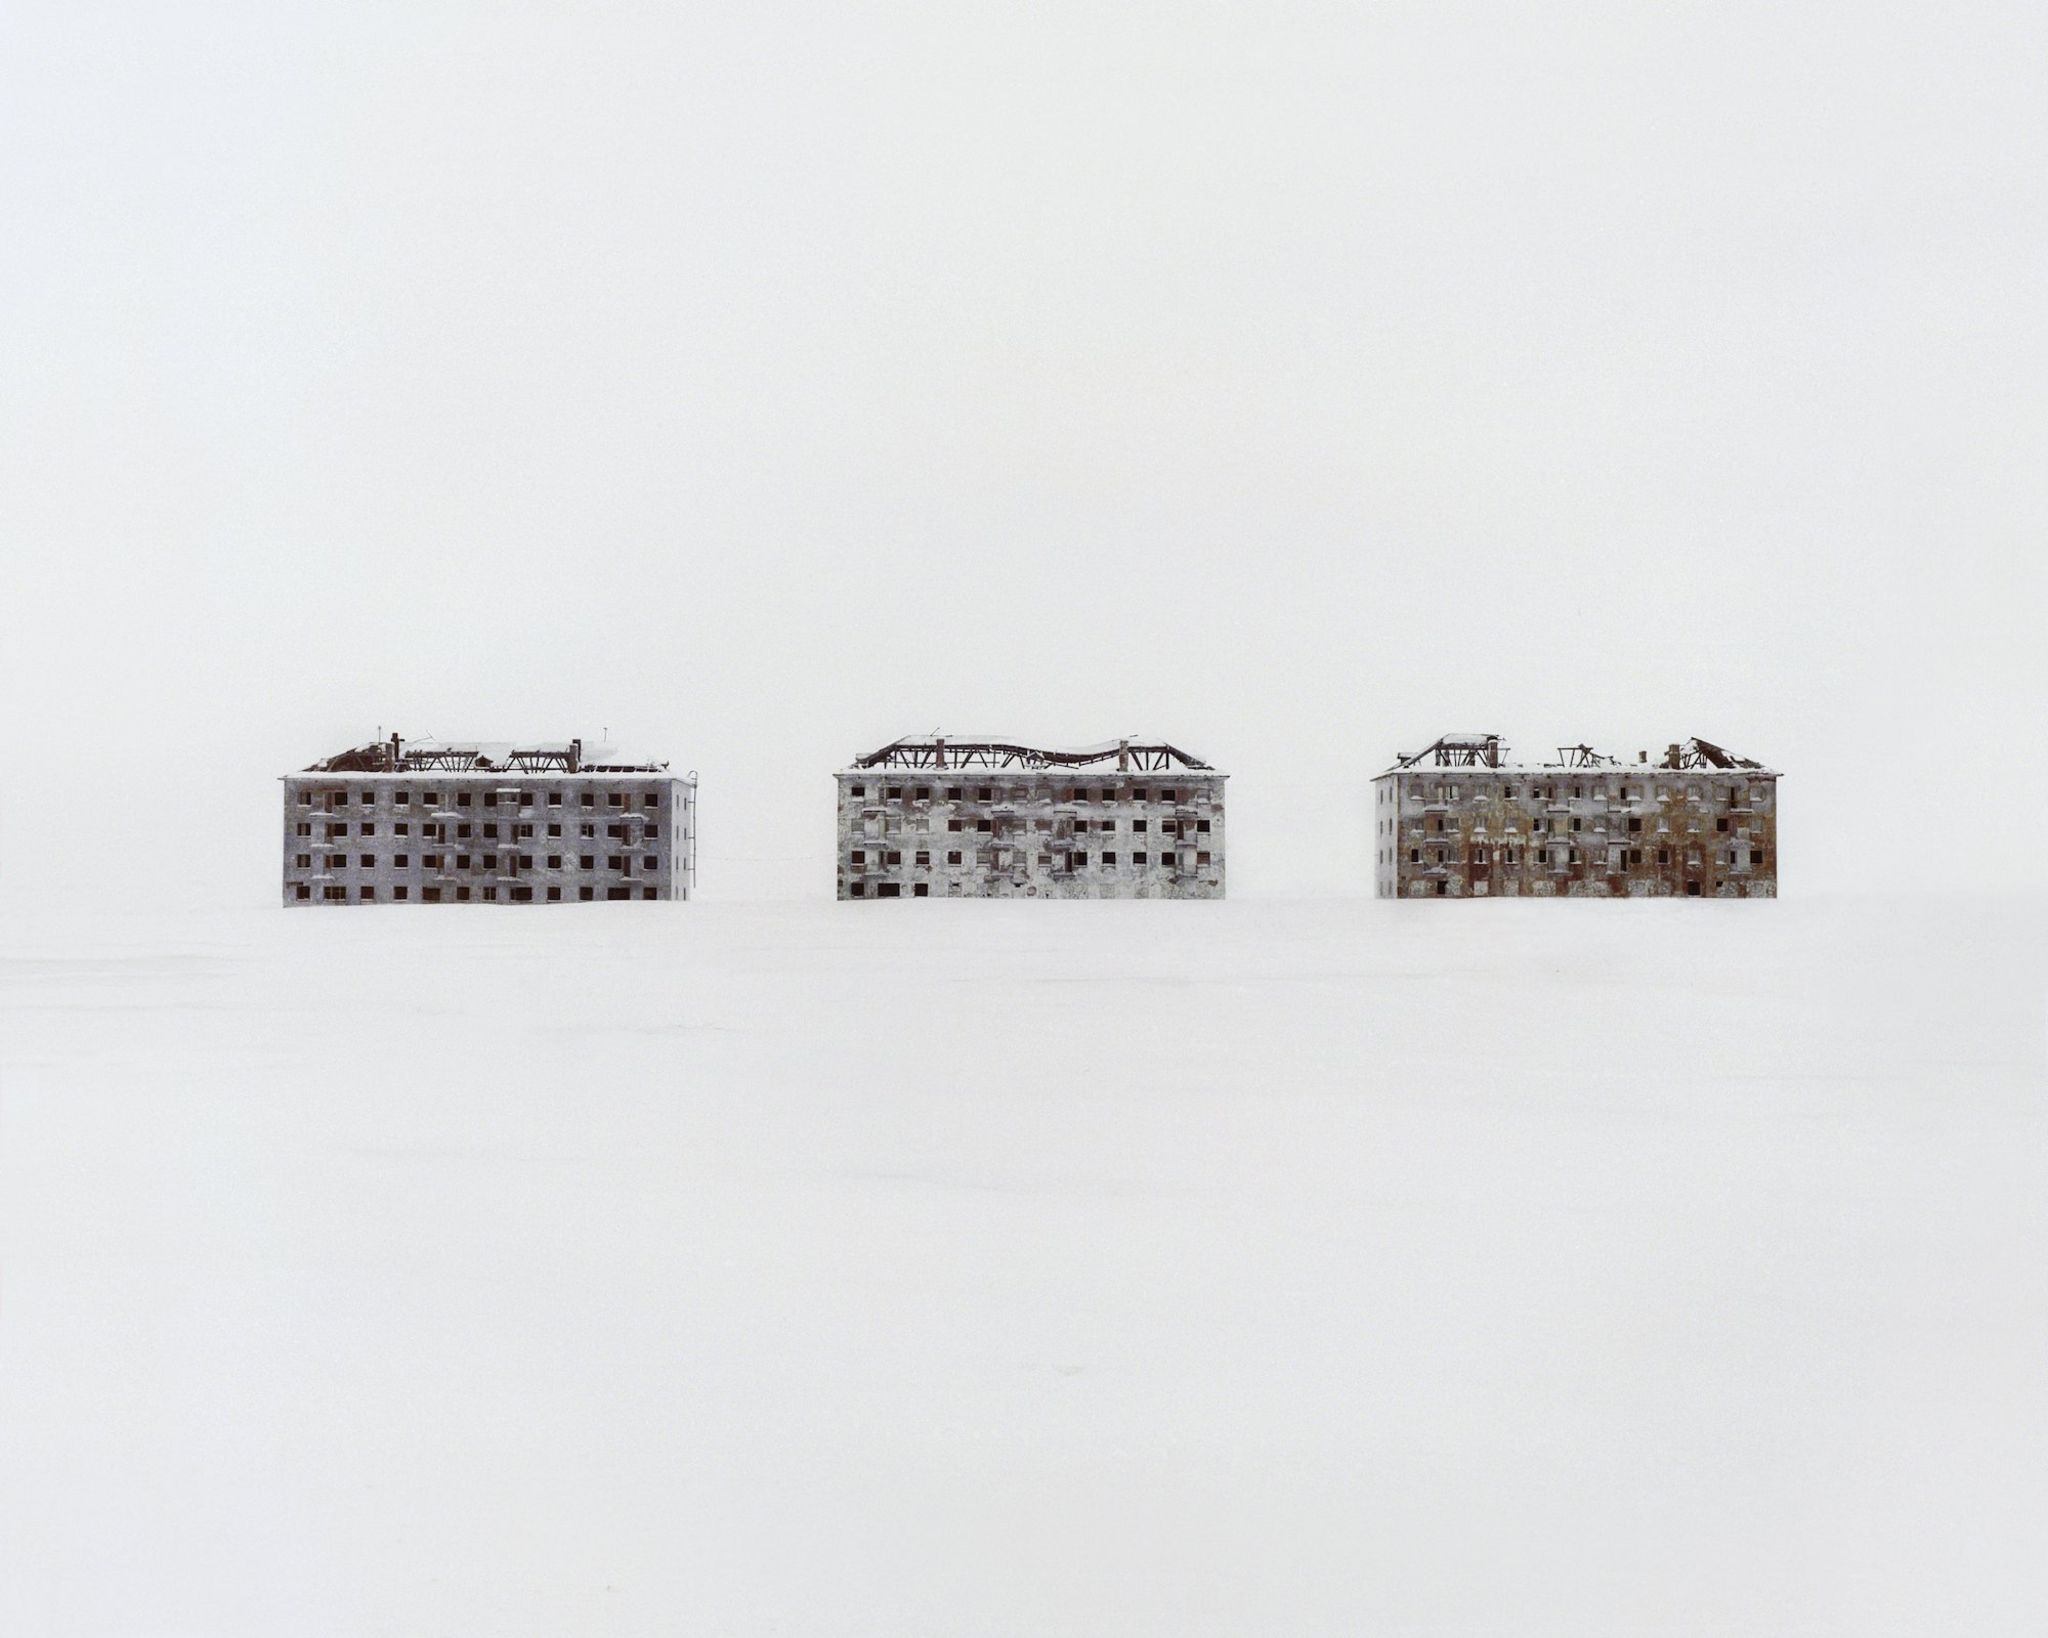 Restricted Areas - former residential buildings in a deserted polar scientific town that specialised in biological research